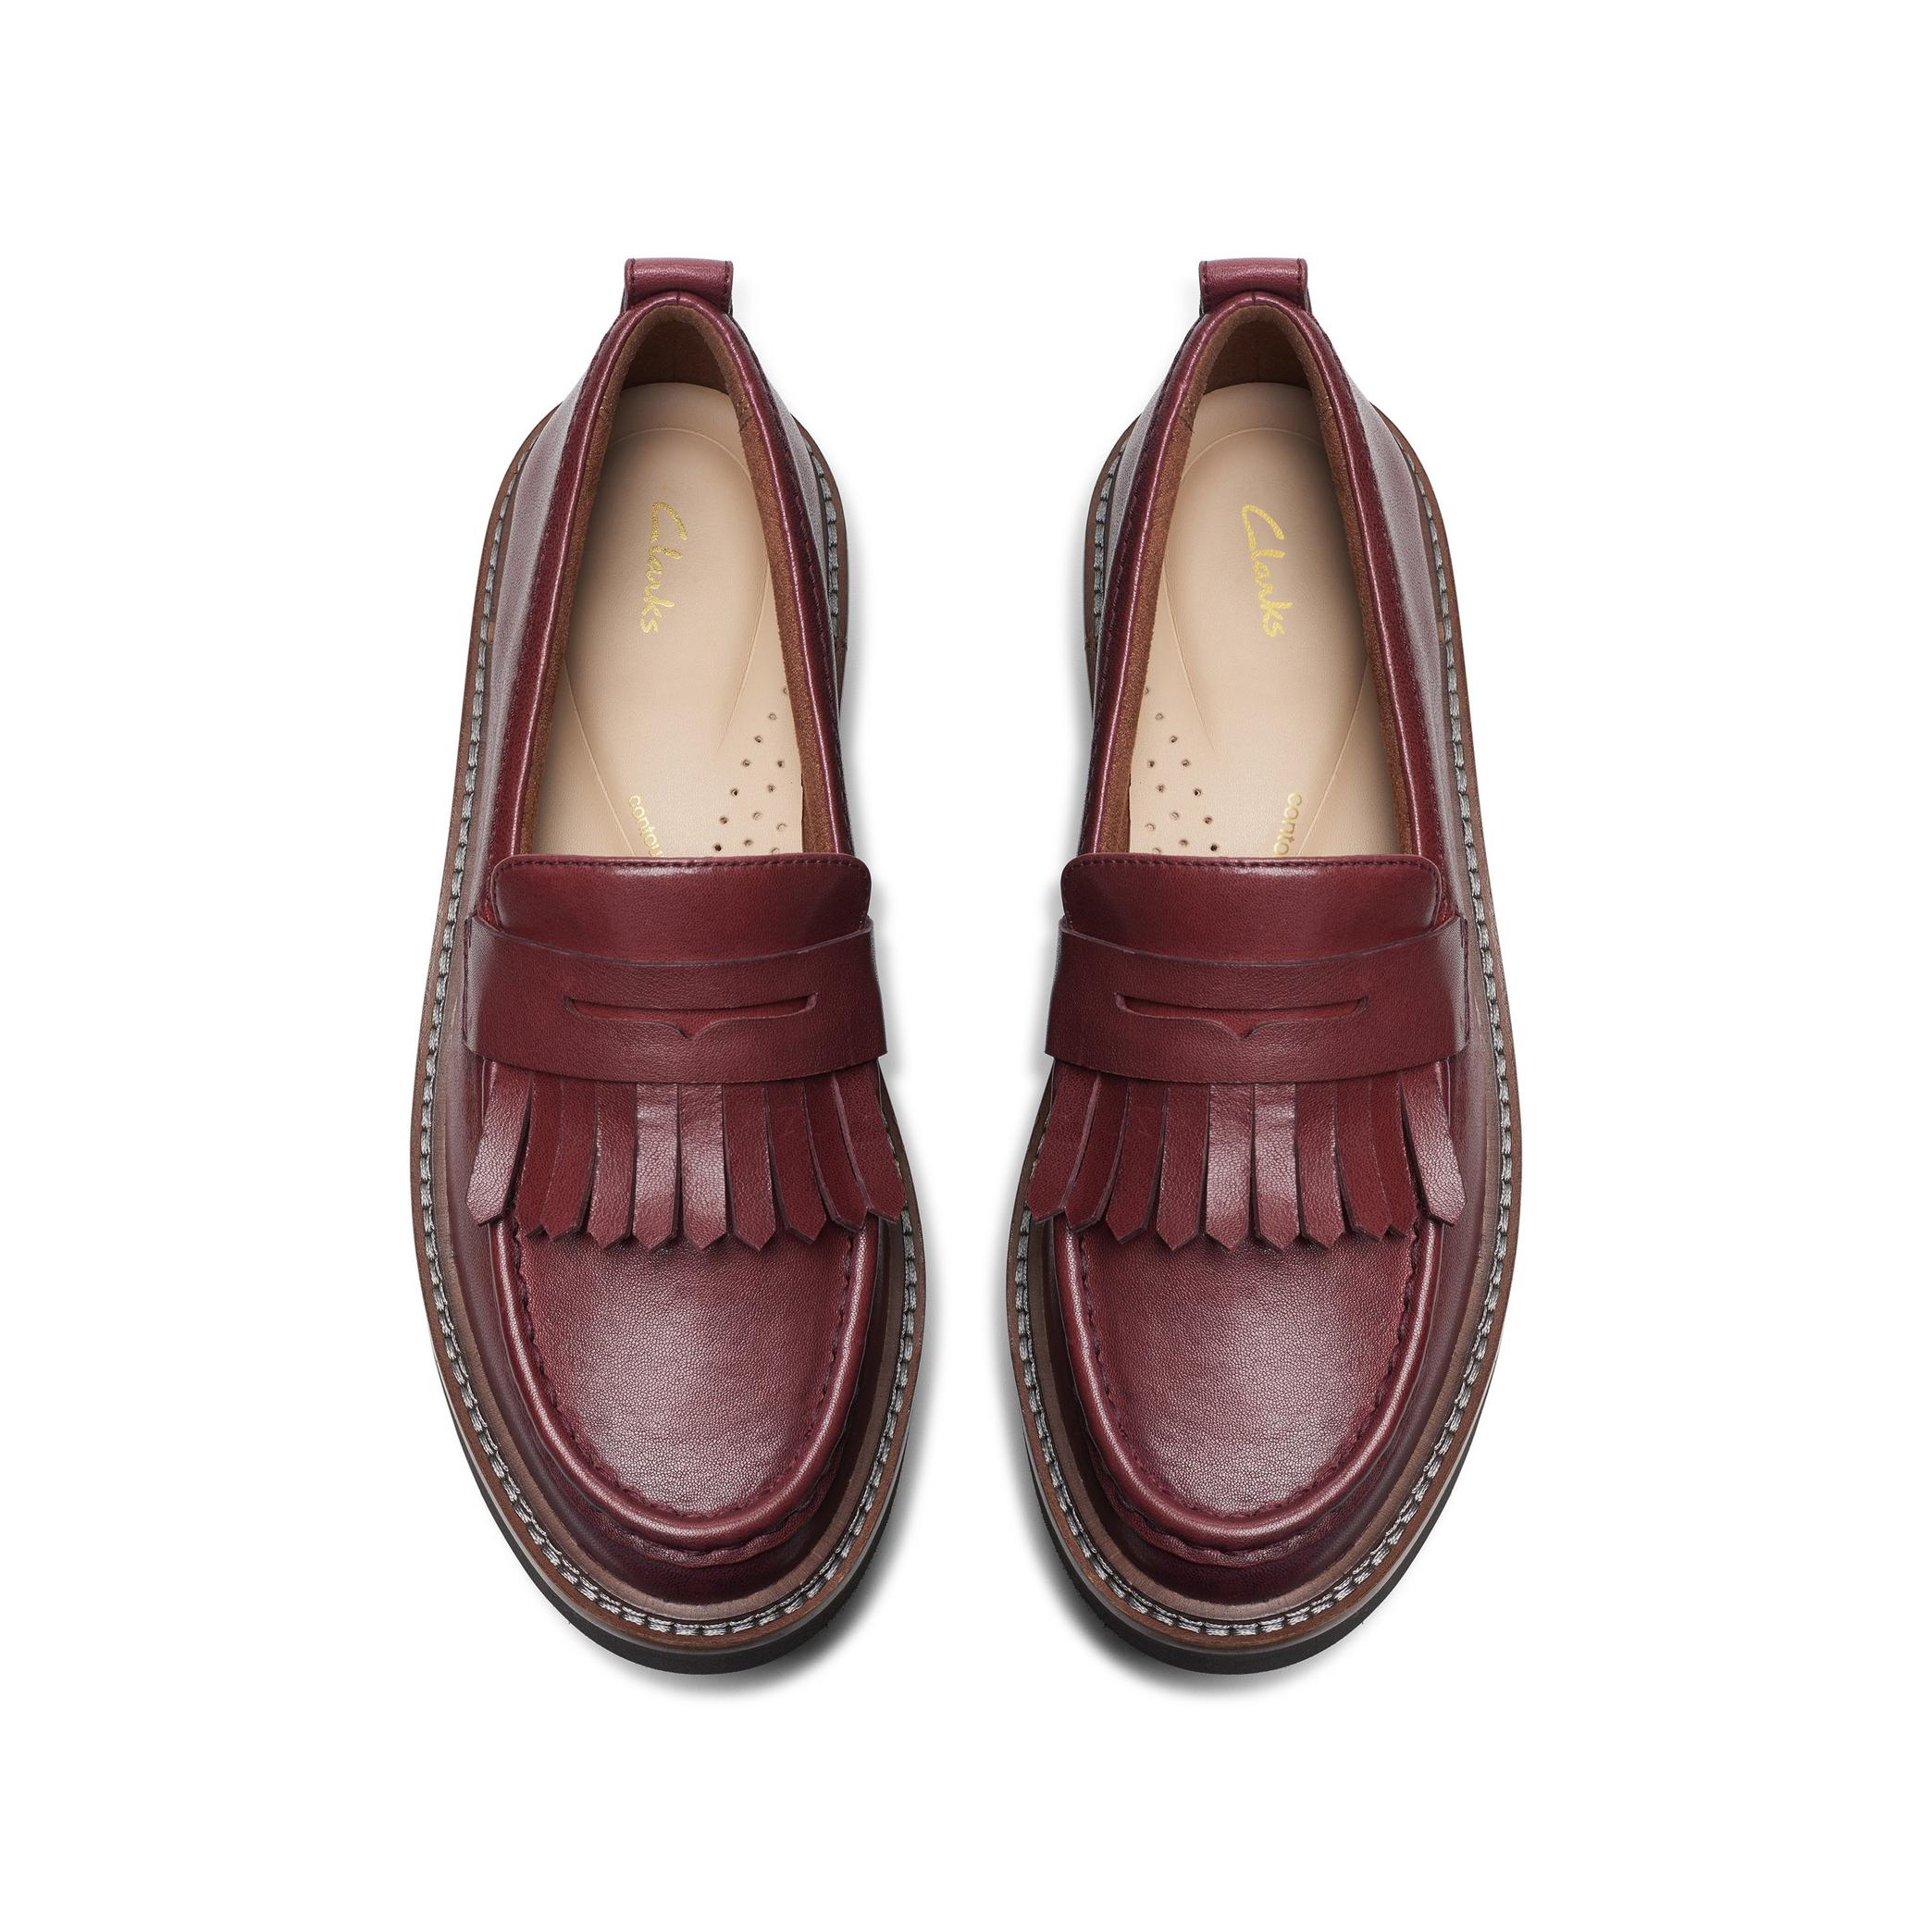 Orianna Loafer Burgundy Leather Loafers, view 7 of 7